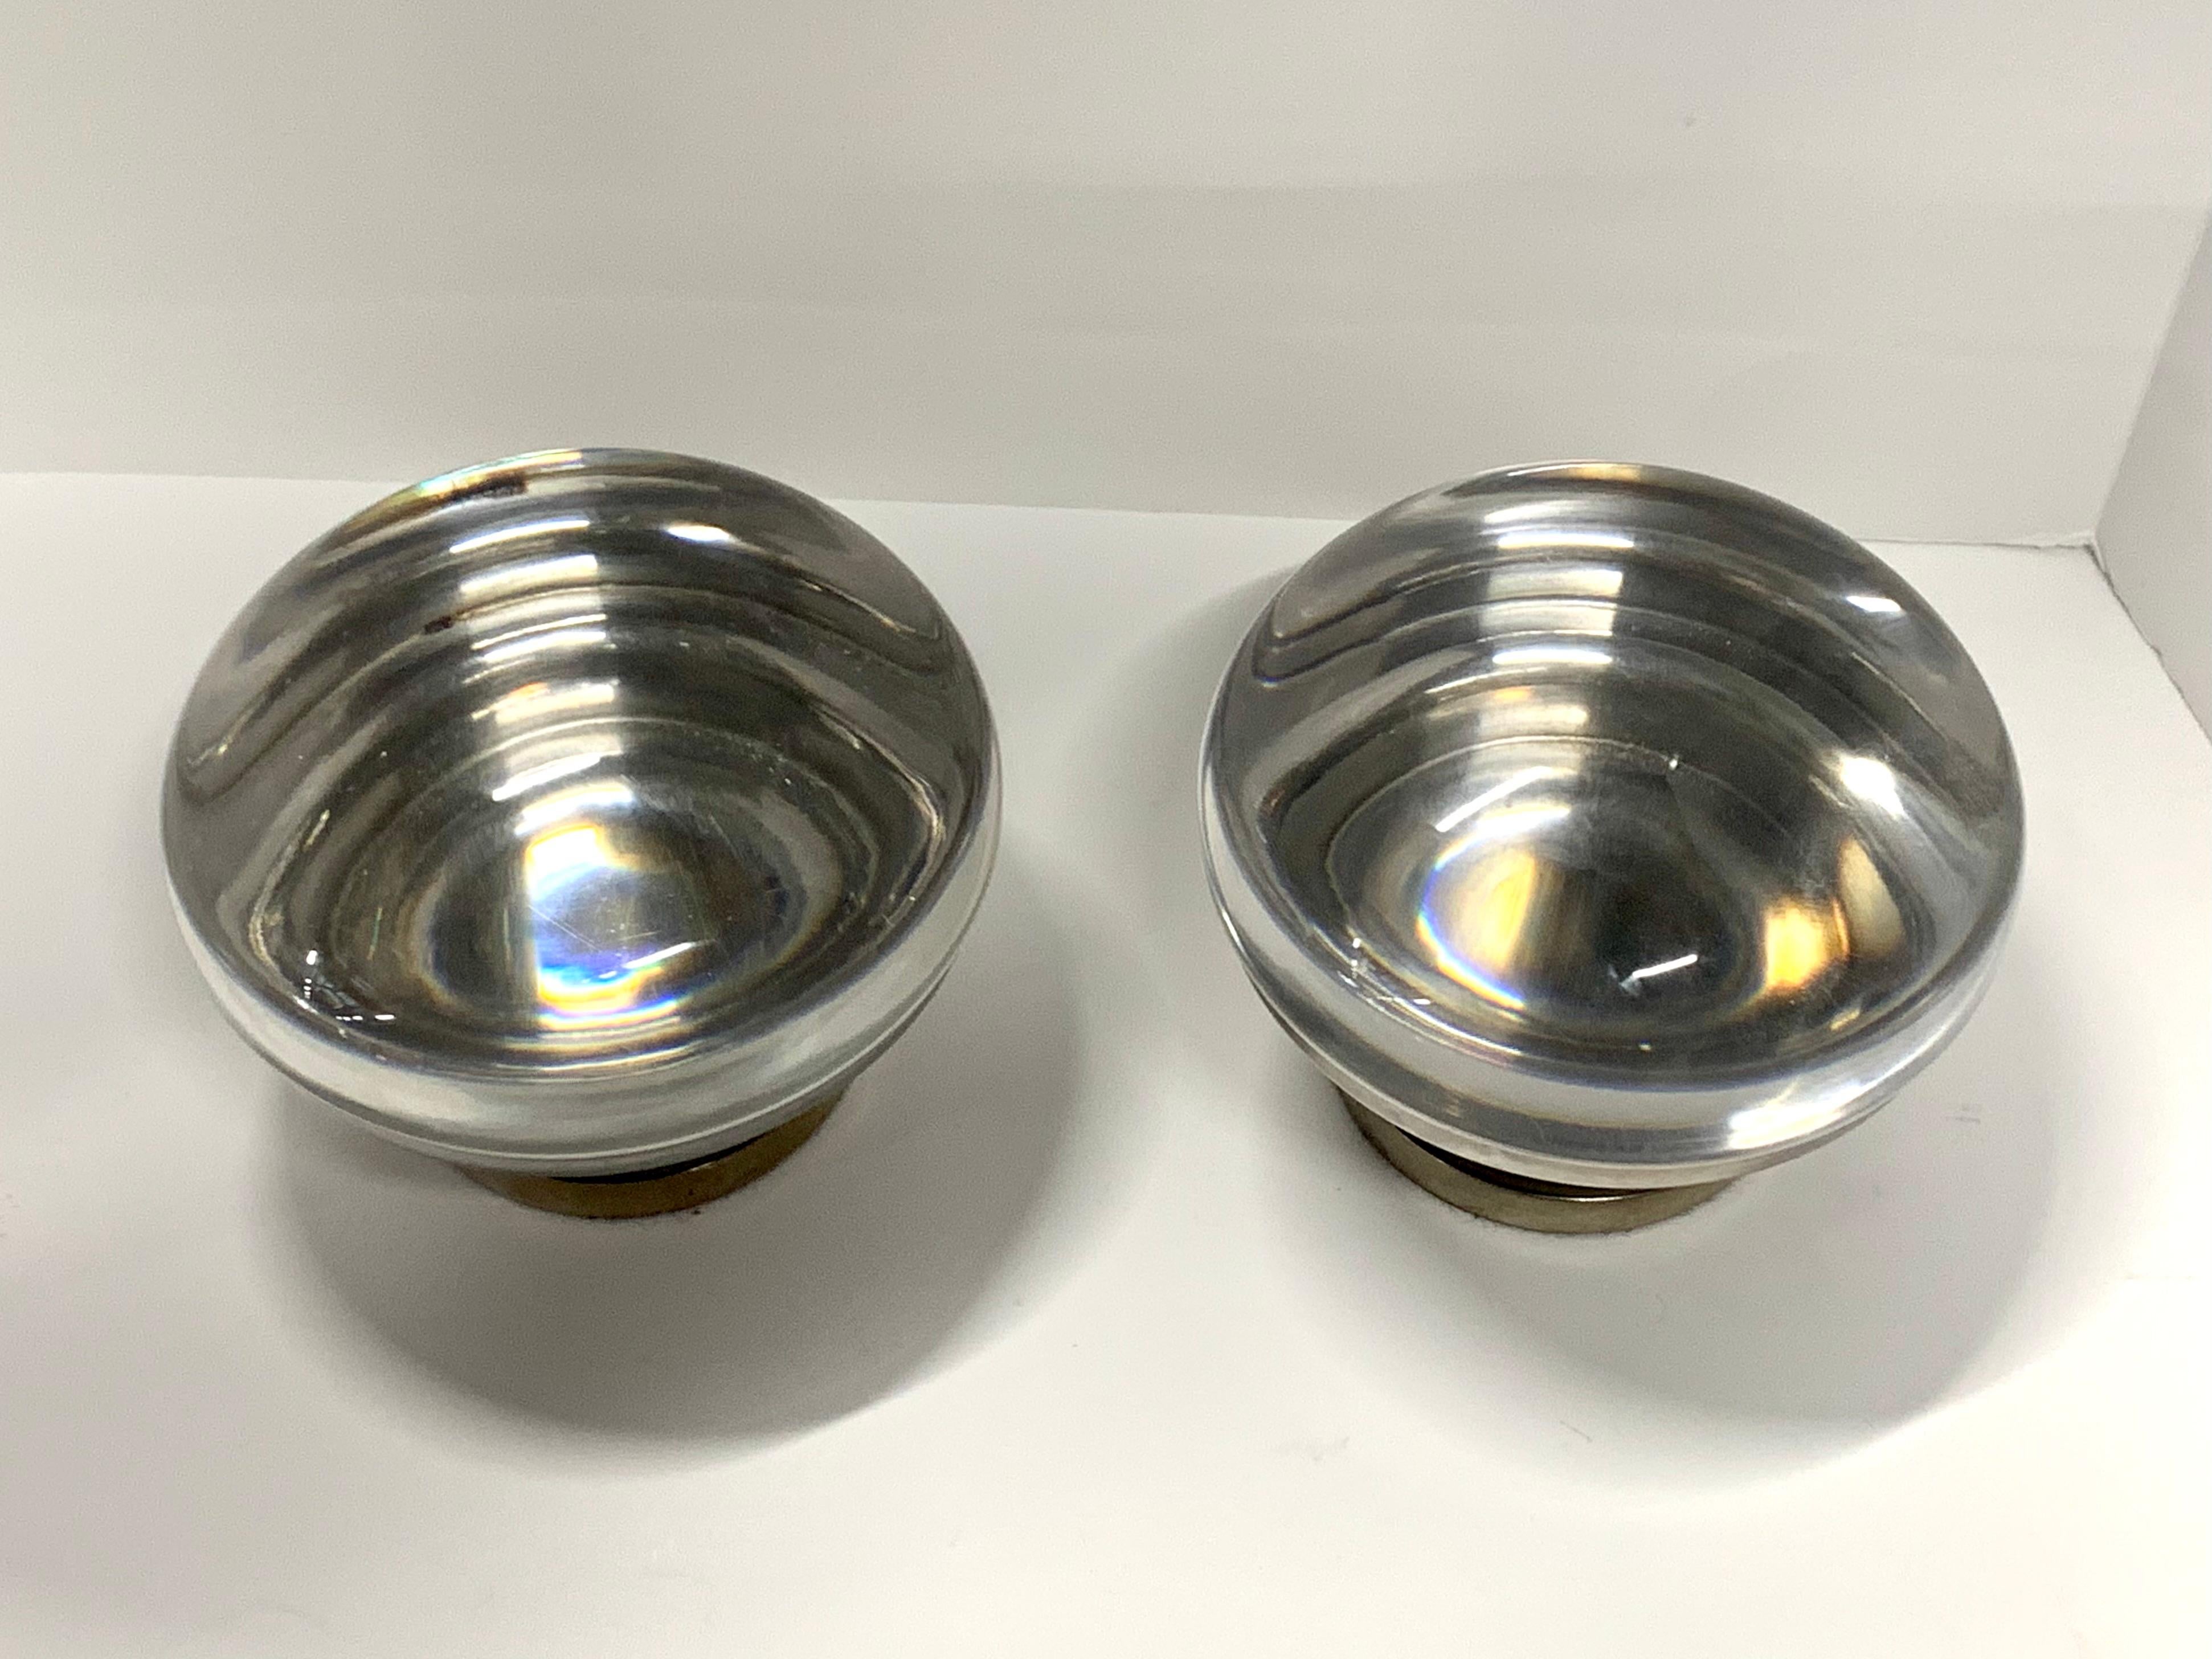 A pair of vintage Charles Hollis Jones magnifying covered vessels in Lucite and nickel finish. Measure approximate: 6 inches in diameter and 5 inches tall. In good vintage condition with minor marks throughout. These were purchased from Mr. Jones